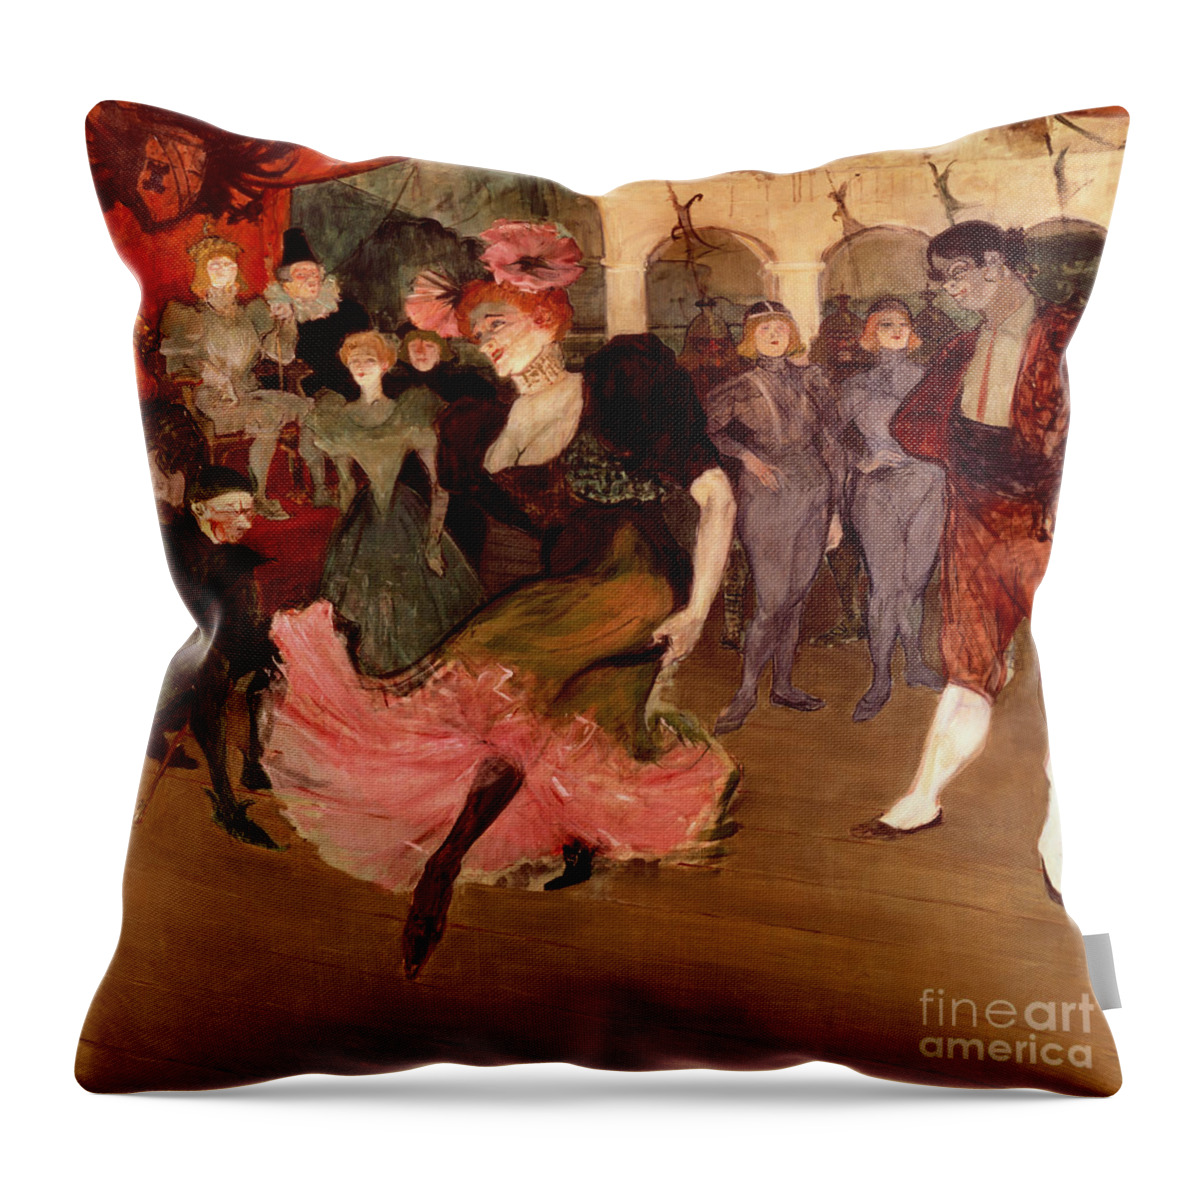 Dancing The Bolero Throw Pillow featuring the painting Marcelle Lender dancing the Bolero in Chilperic by Henri de Toulouse Lautrec